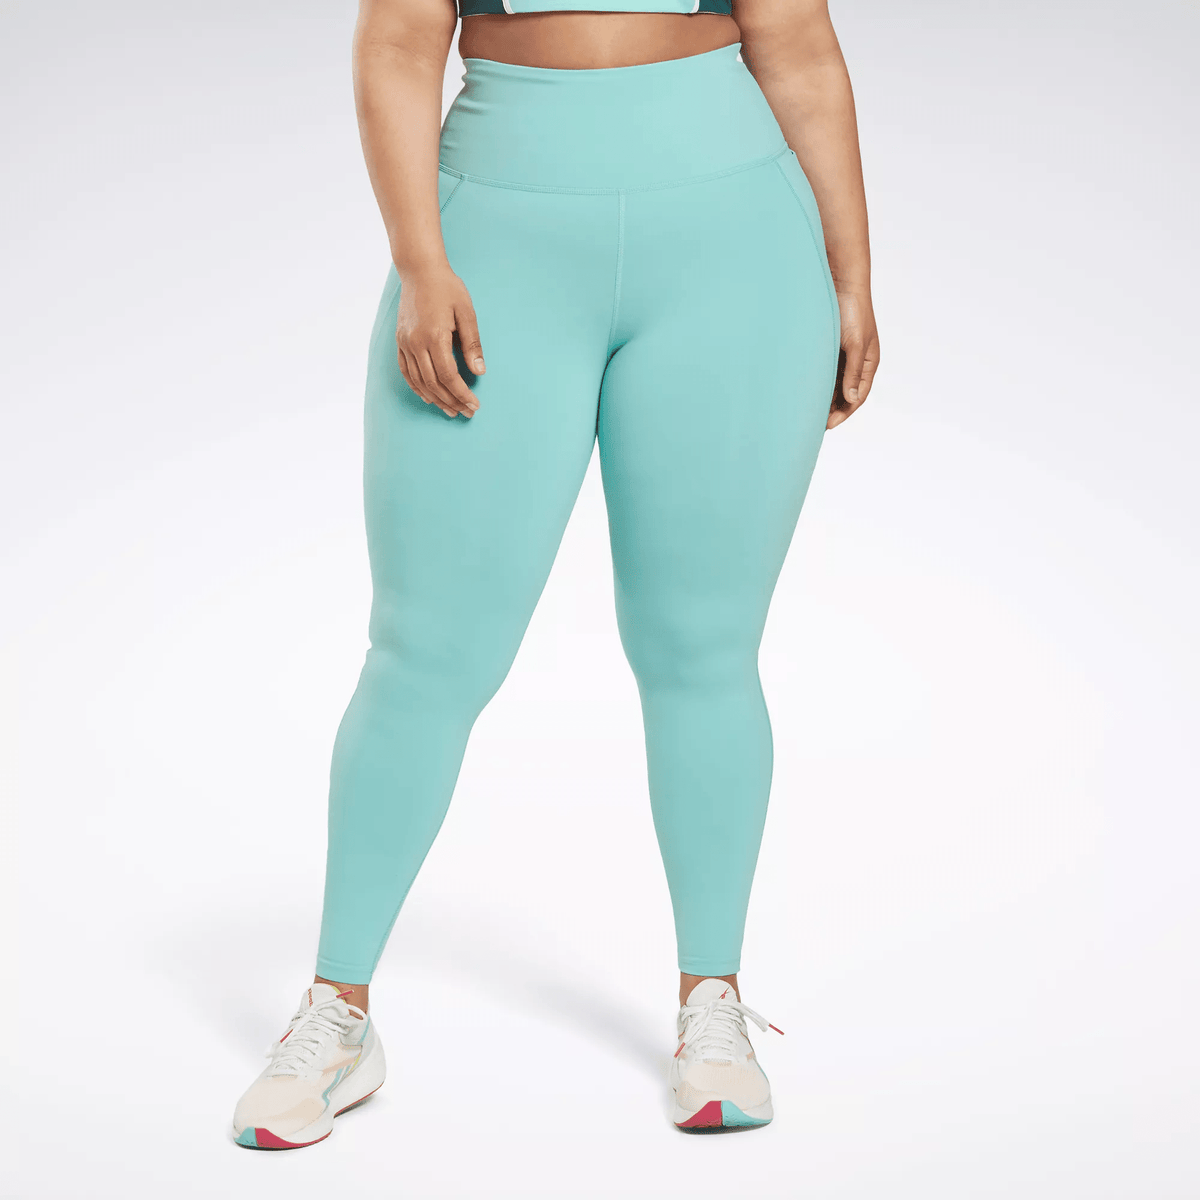 Reebok Women's Lux High-Waisted Tights (Plus Size) Turquoise